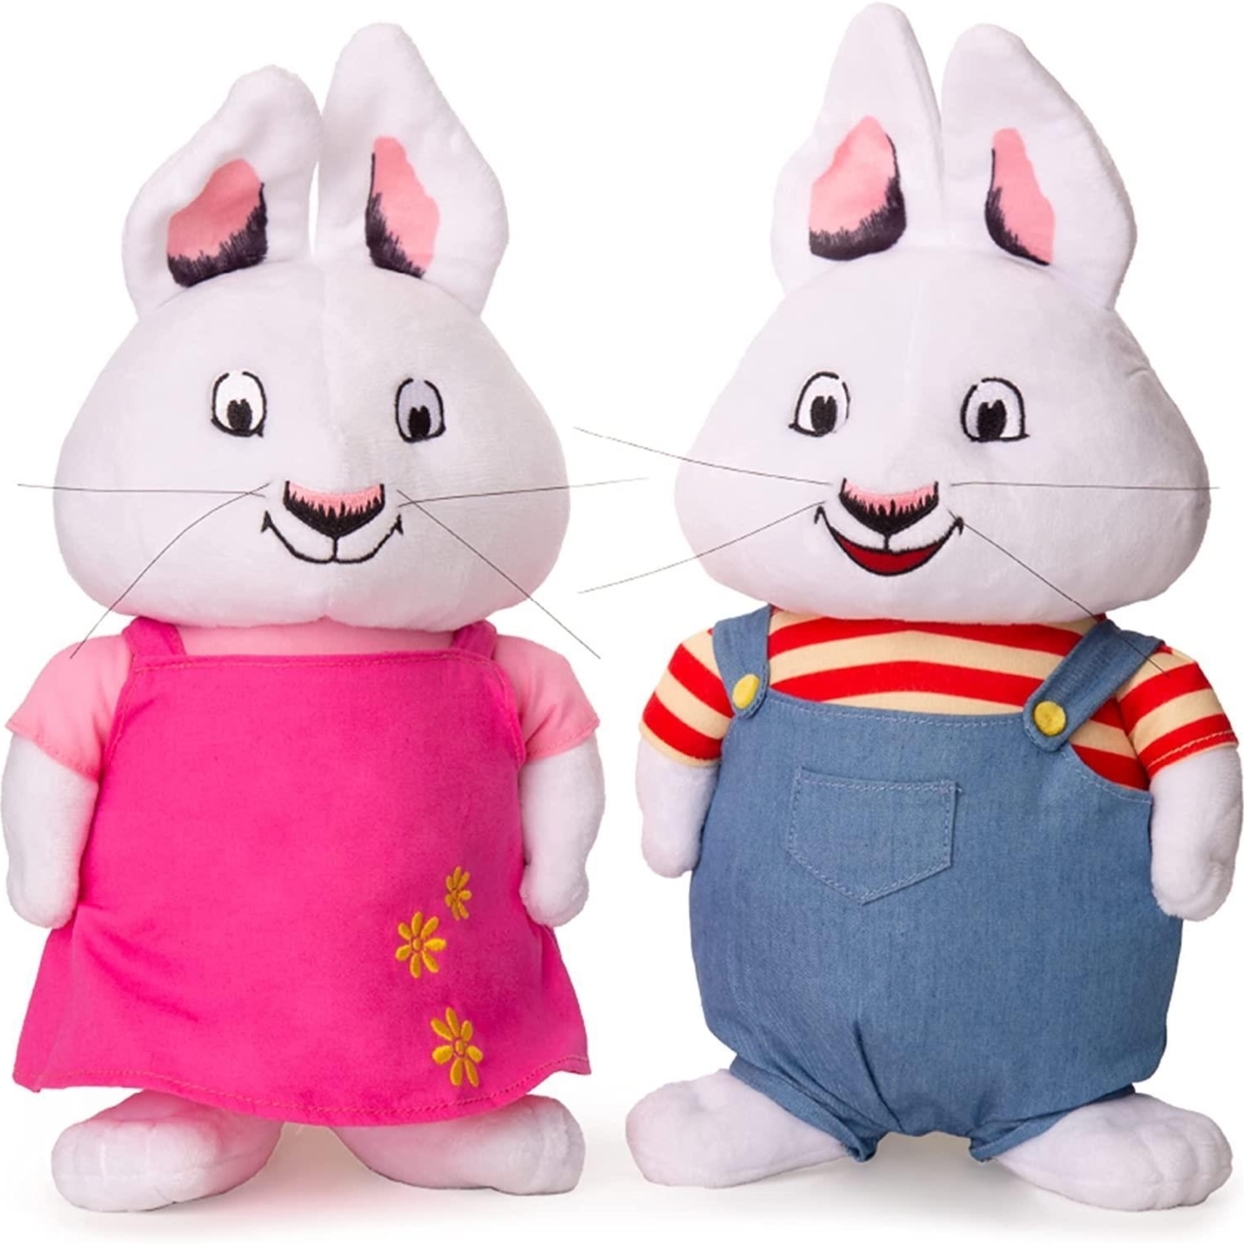 Max And Ruby Rabbit Bundle White Bunny Plush Doll Set Kids TV Show Toy Mighty Mojo